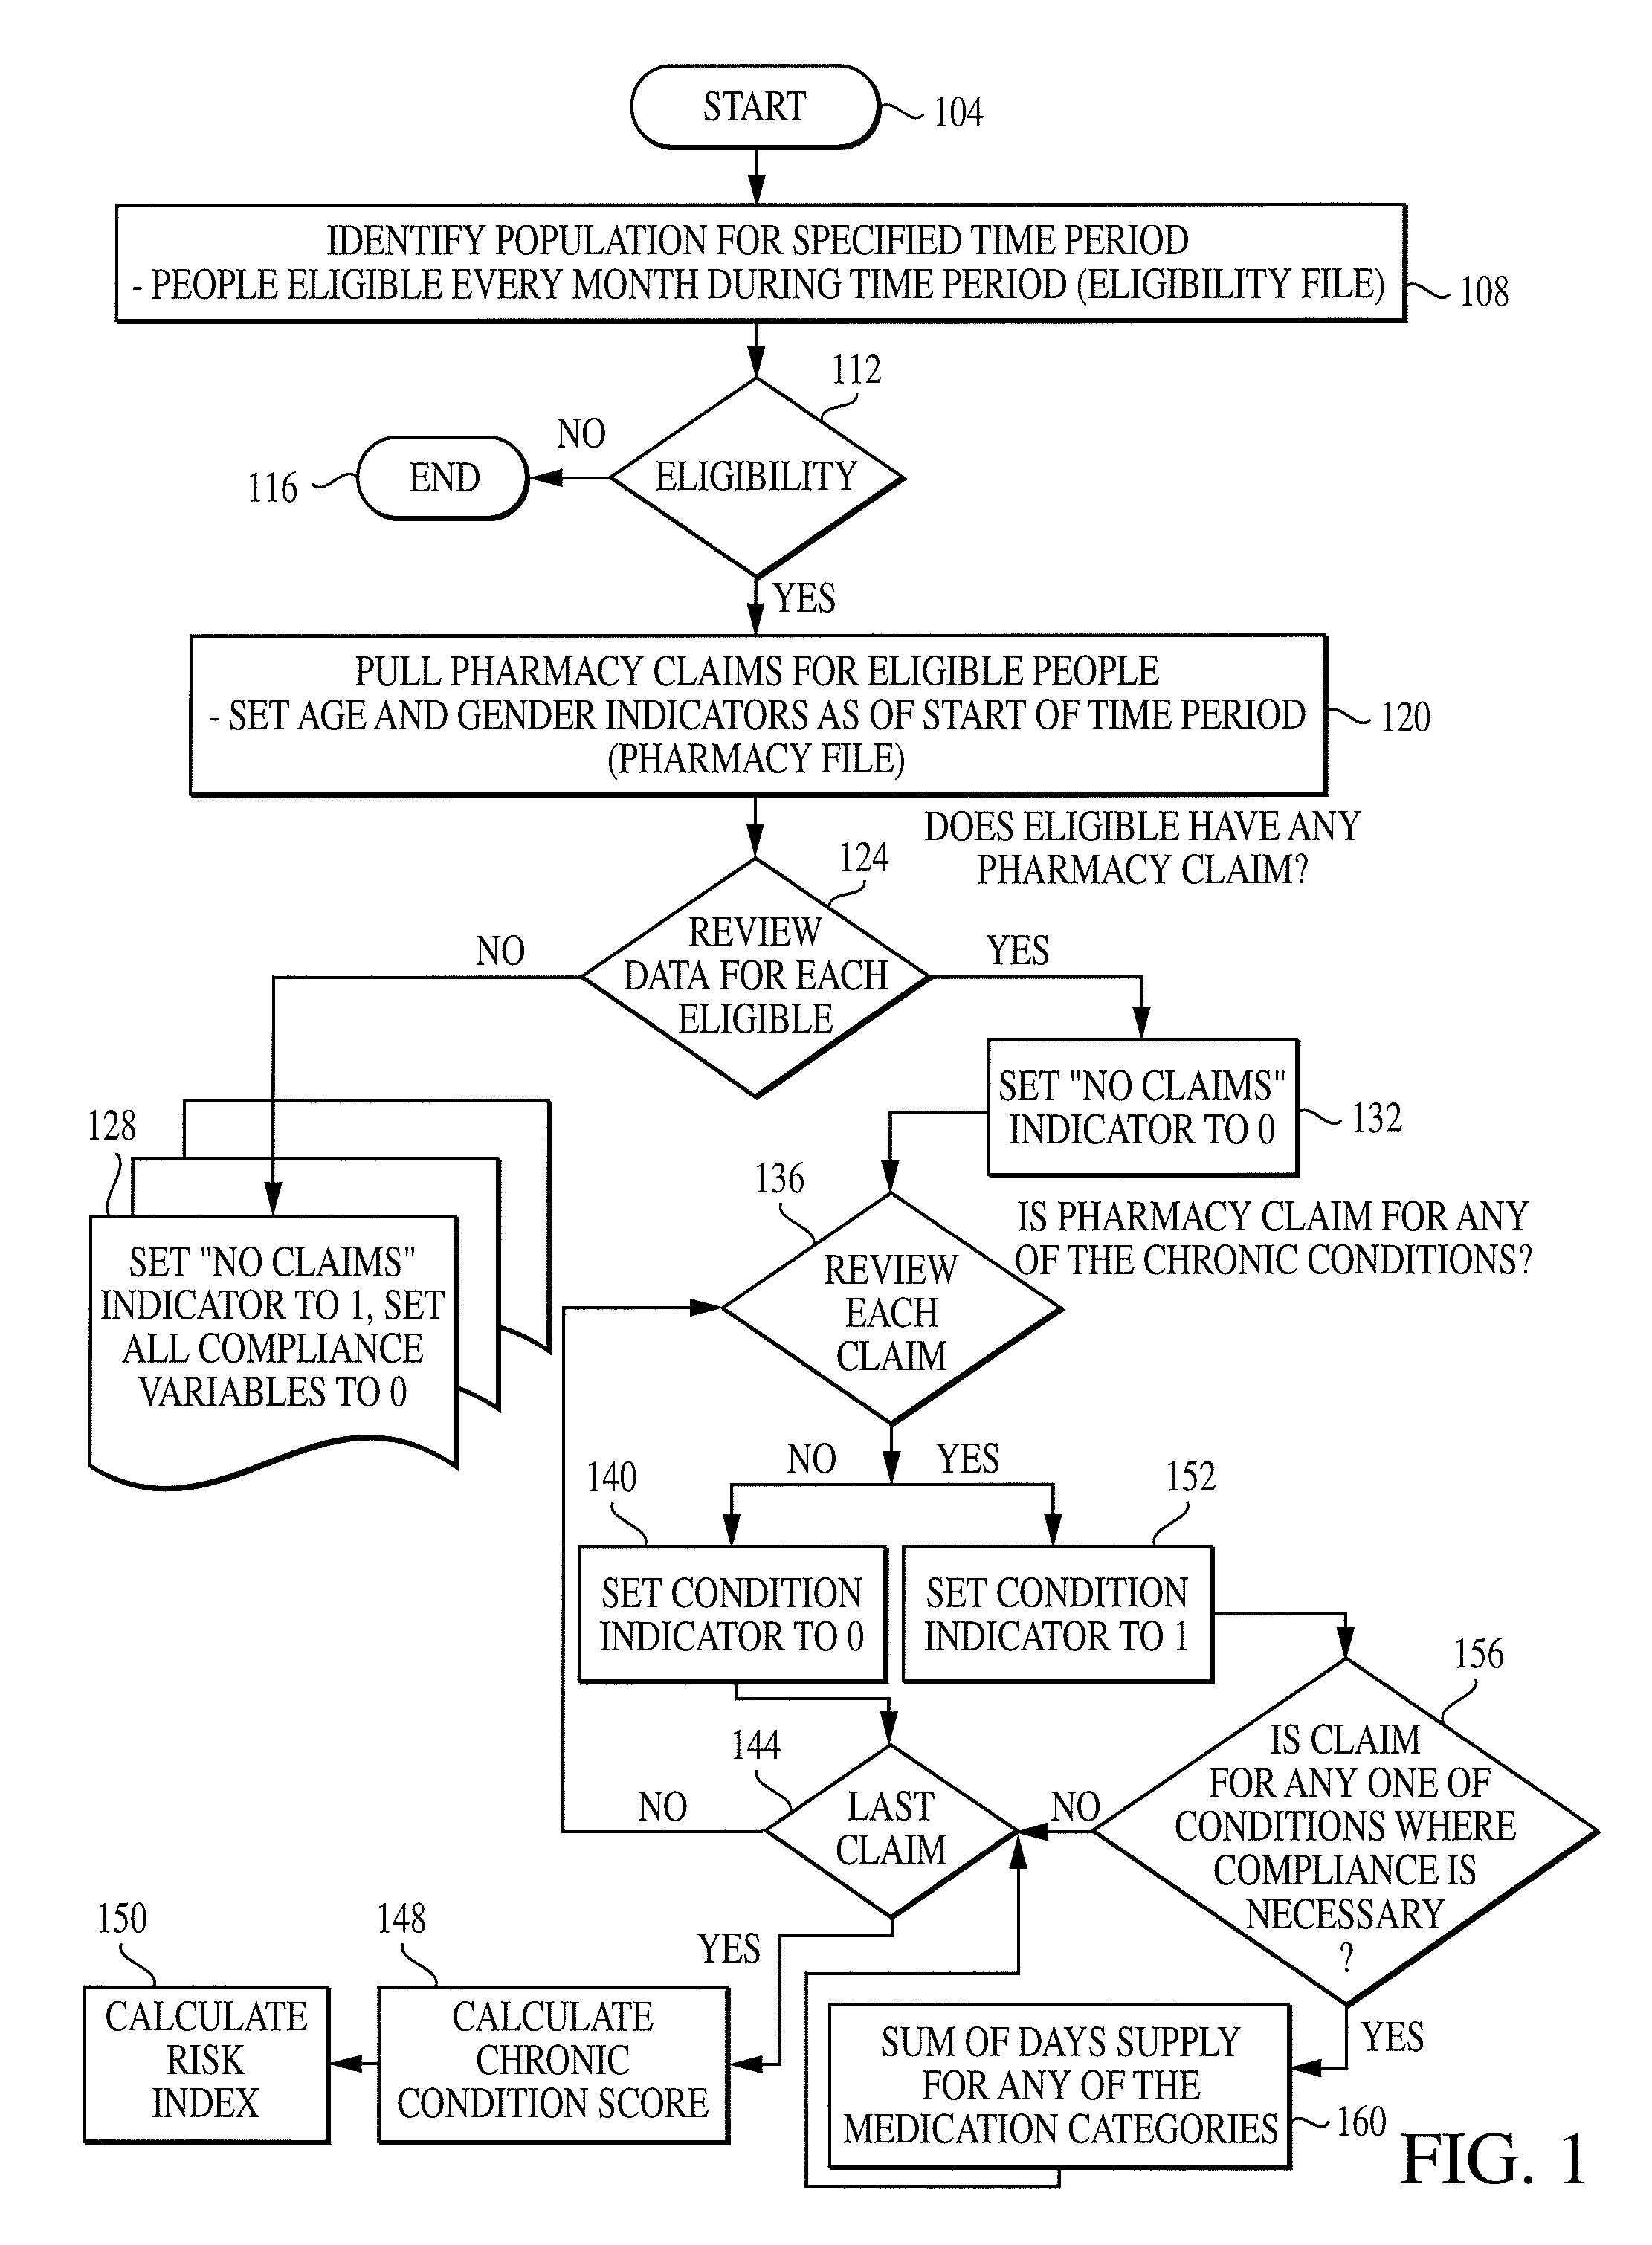 Computer system and method for generating healthcare risk indices using medication compliance information